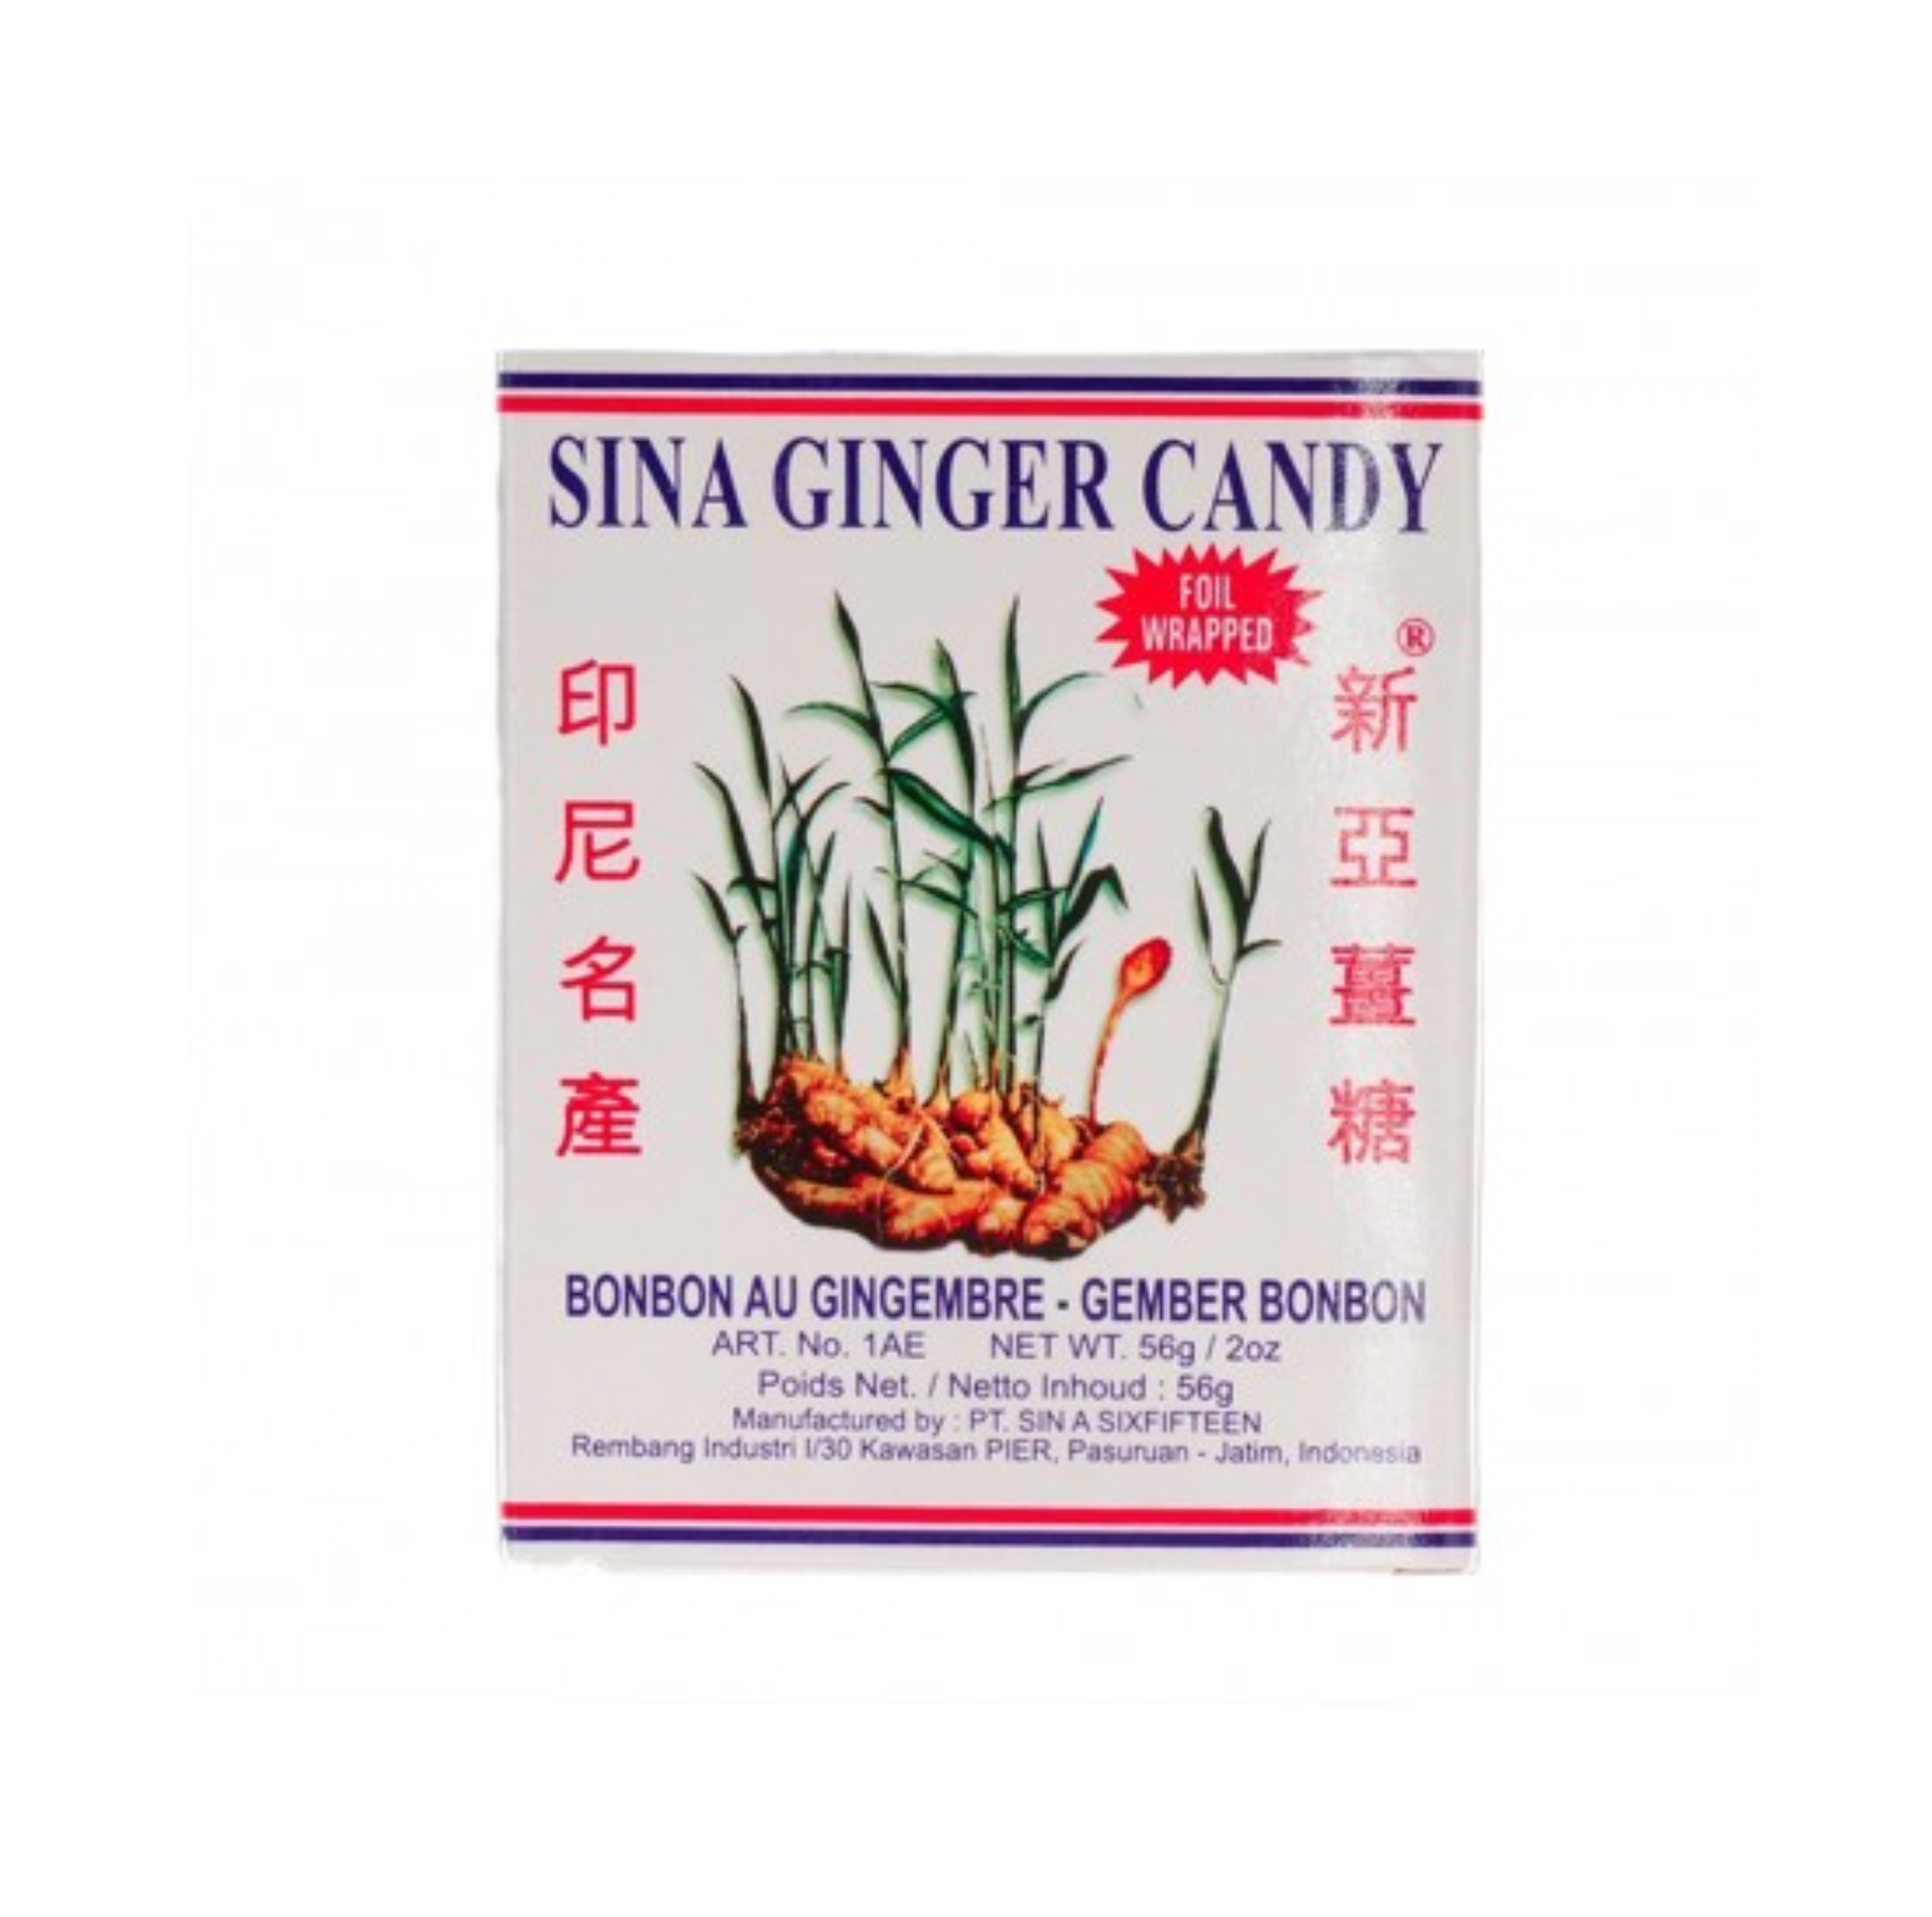 Sina Ginger candy